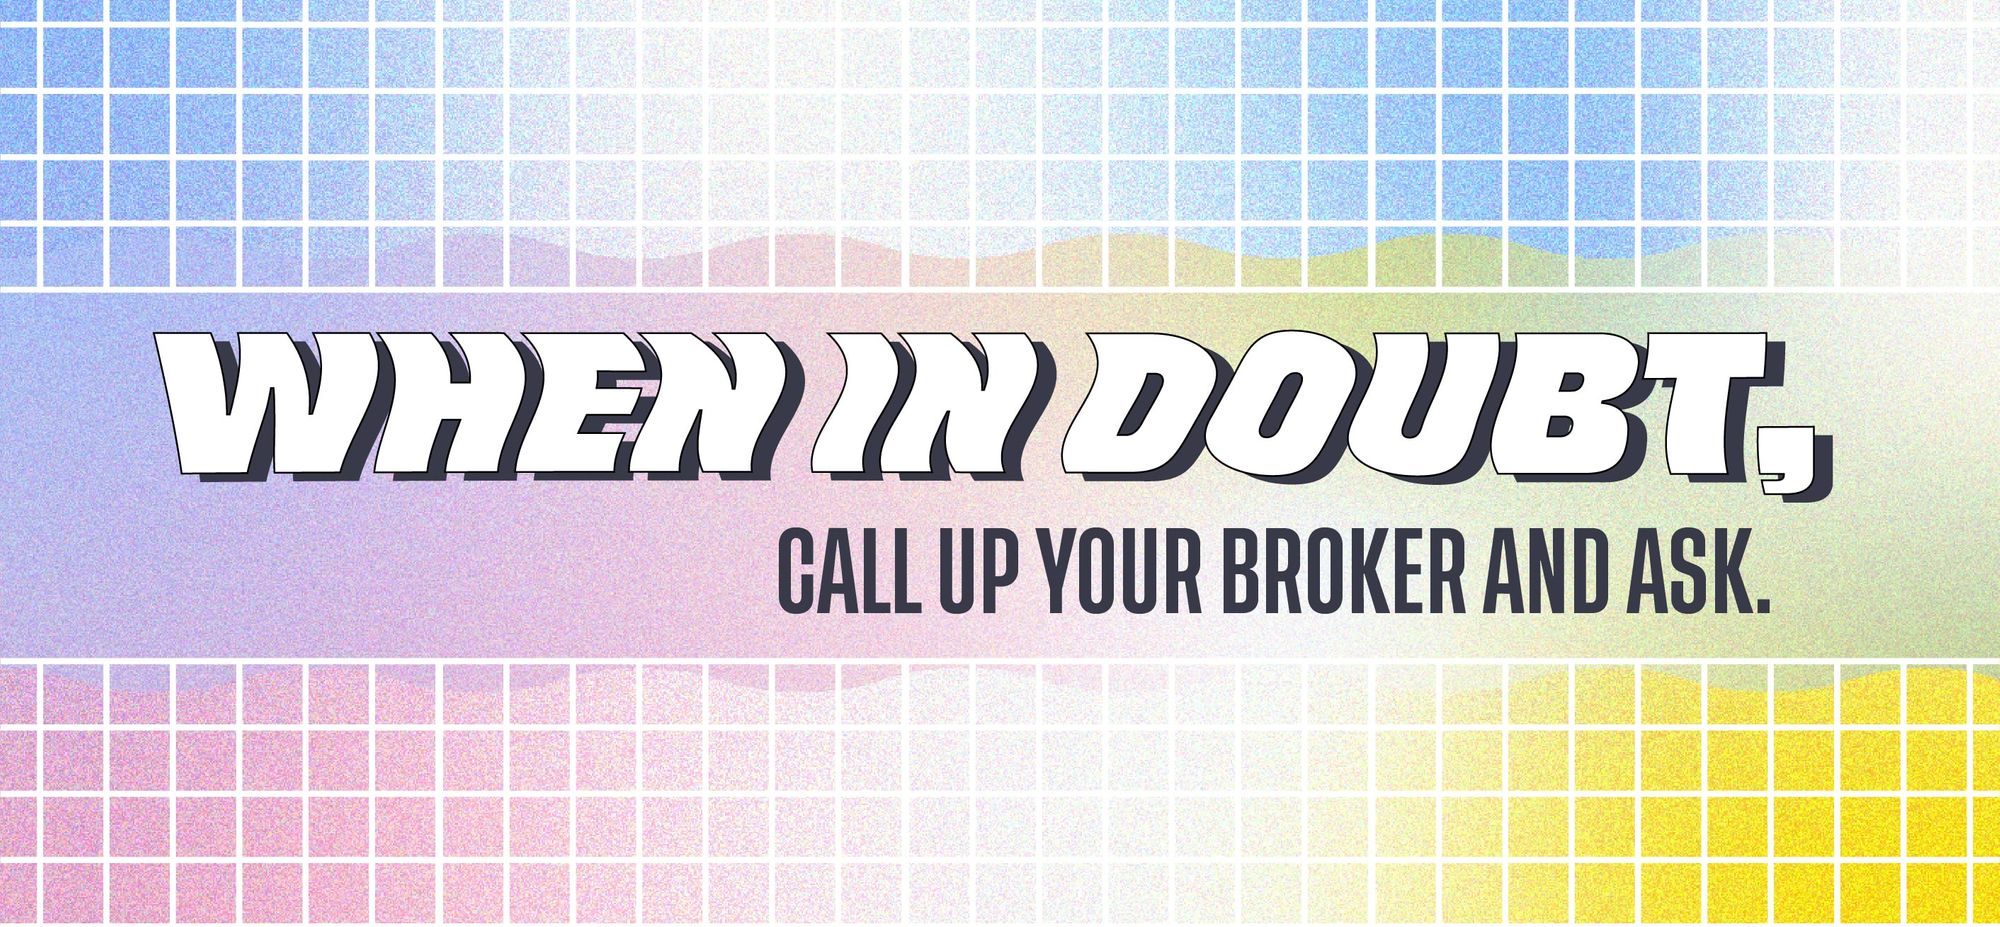 When in doubt, call up your broker and ask.